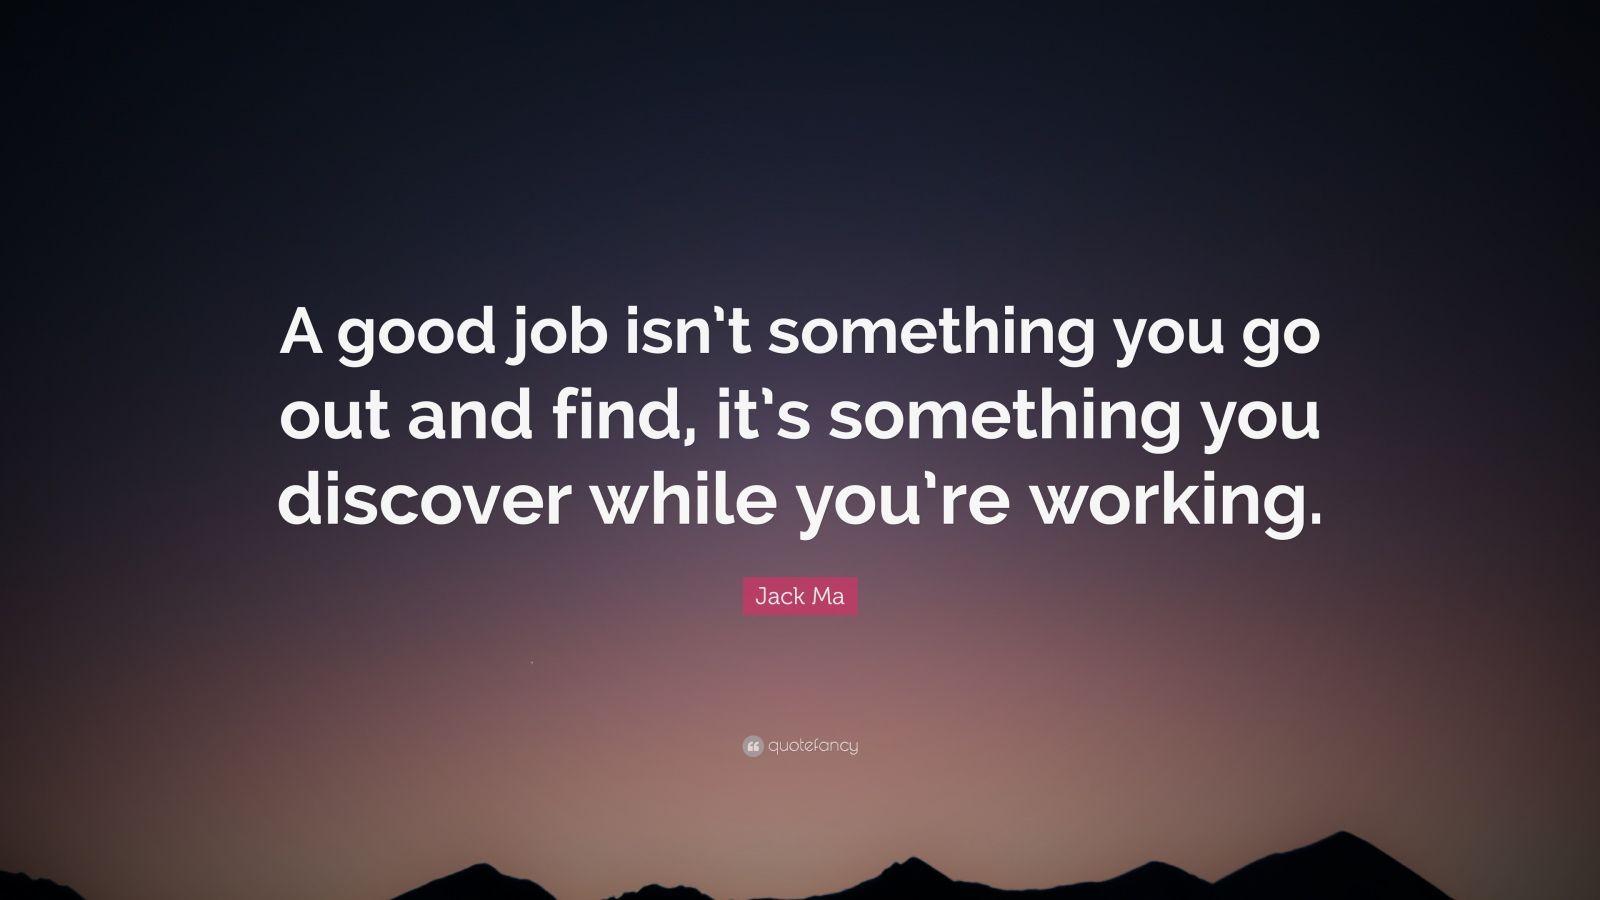 Jack Ma Quote: “A good job isn't something you go out and find, it's something you discover while you're working.”